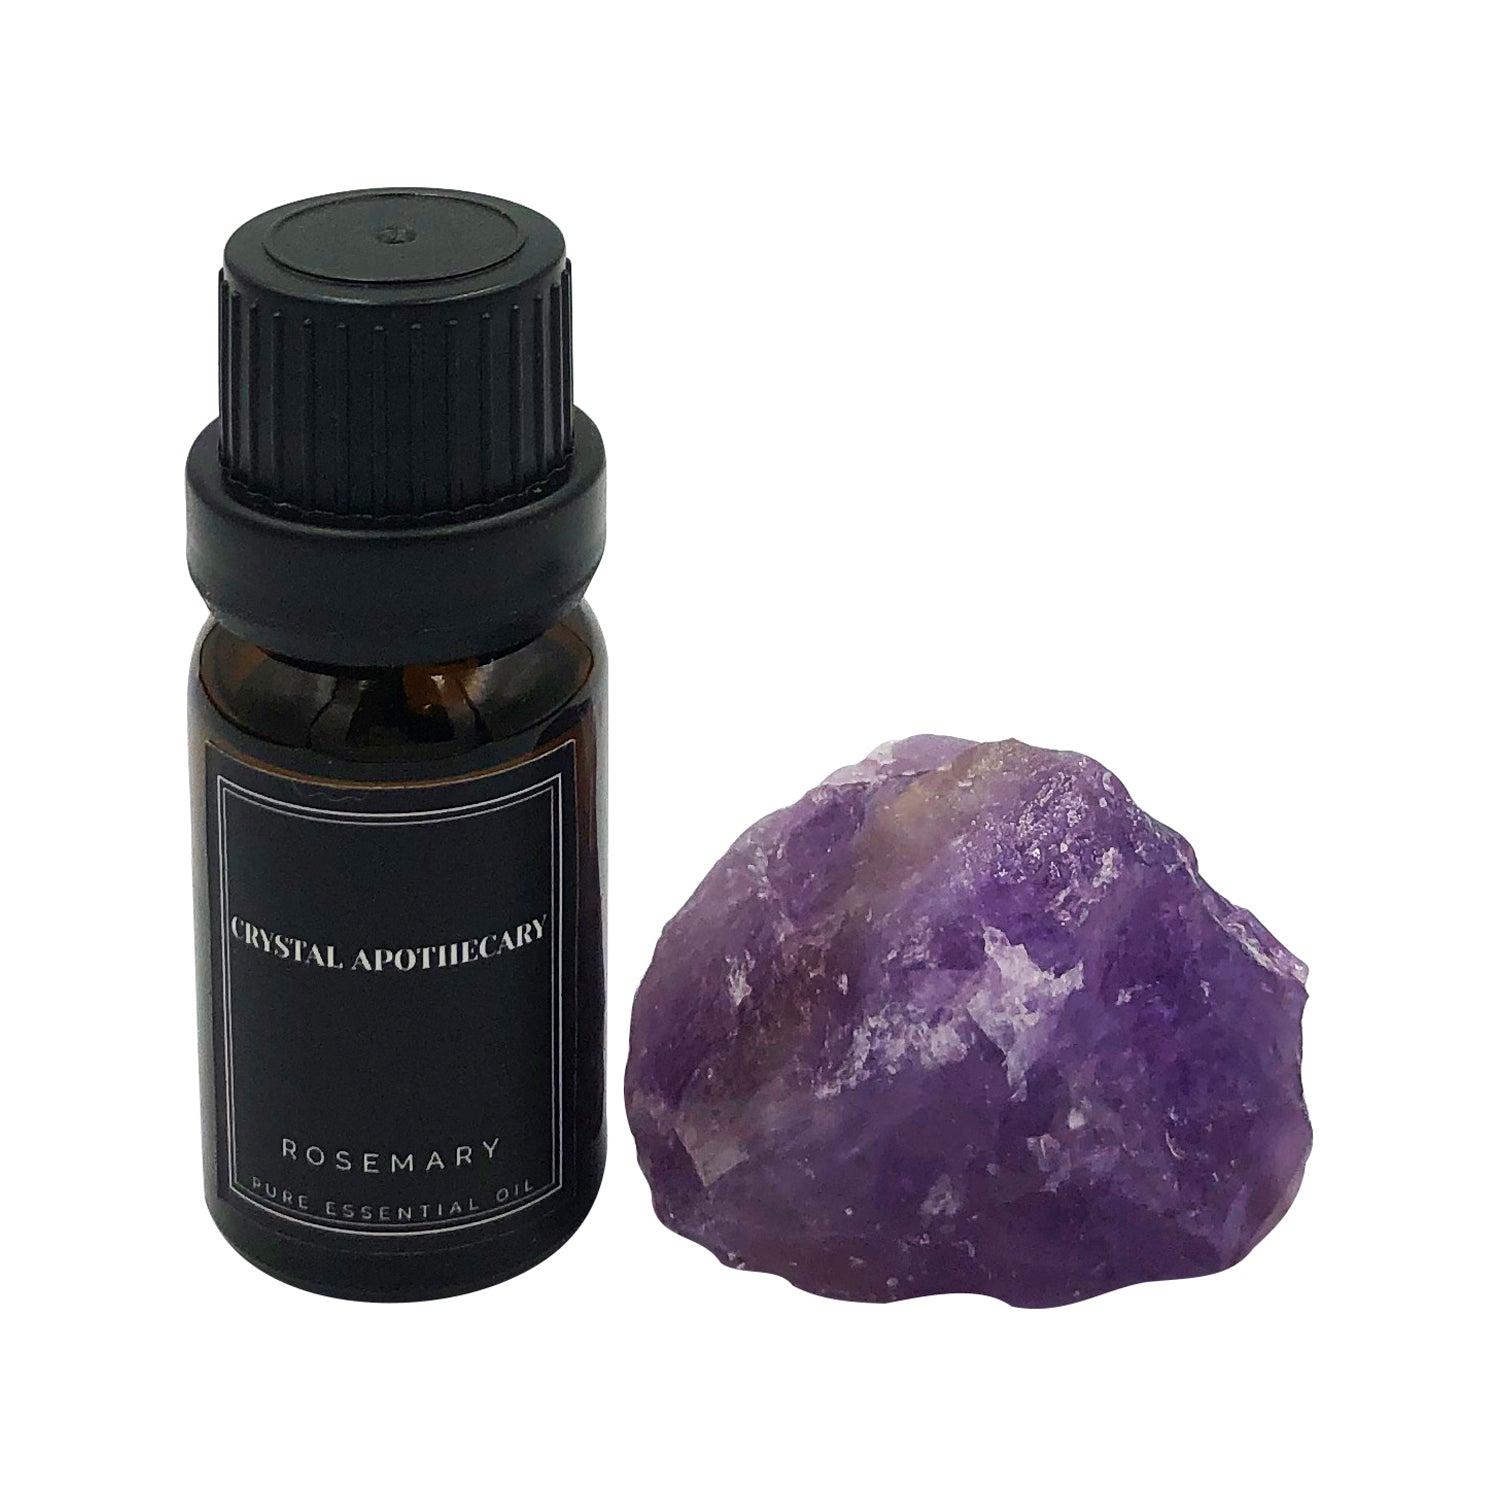 Rosemary Pure Essential Oil with Amethyst